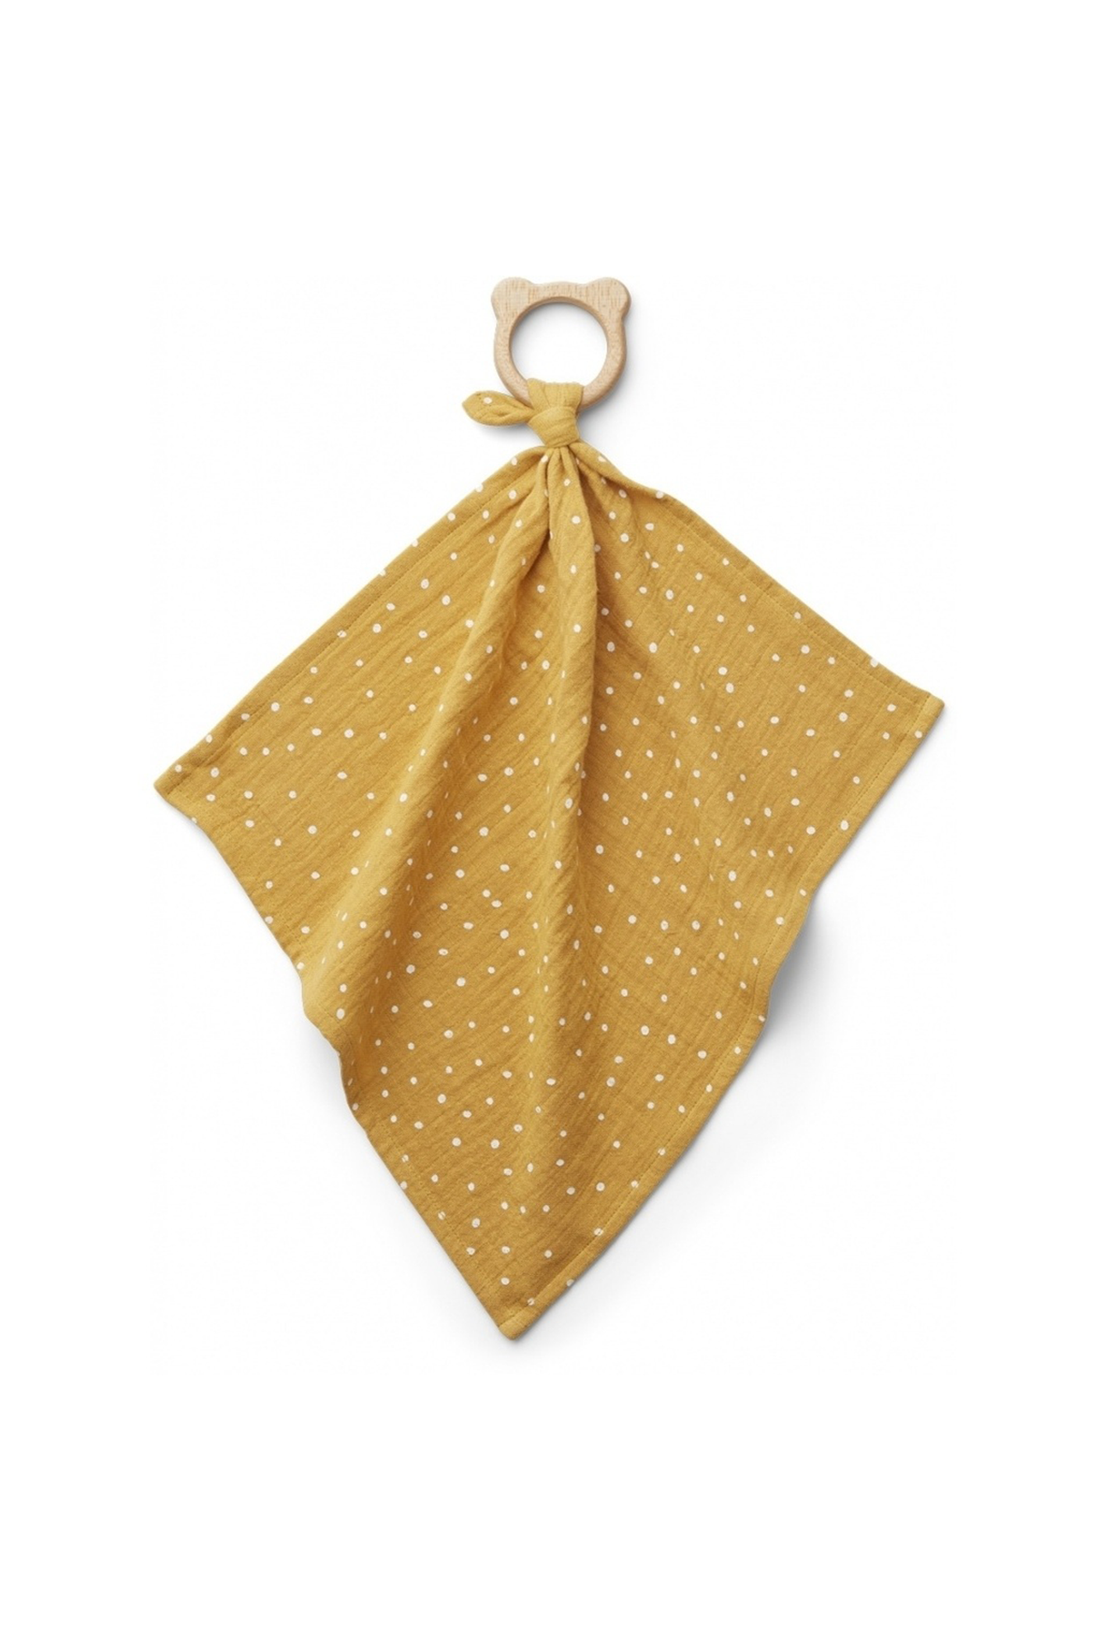 Liewood Confetti Yellow Mellow Dines Teether Cuddle Cloth